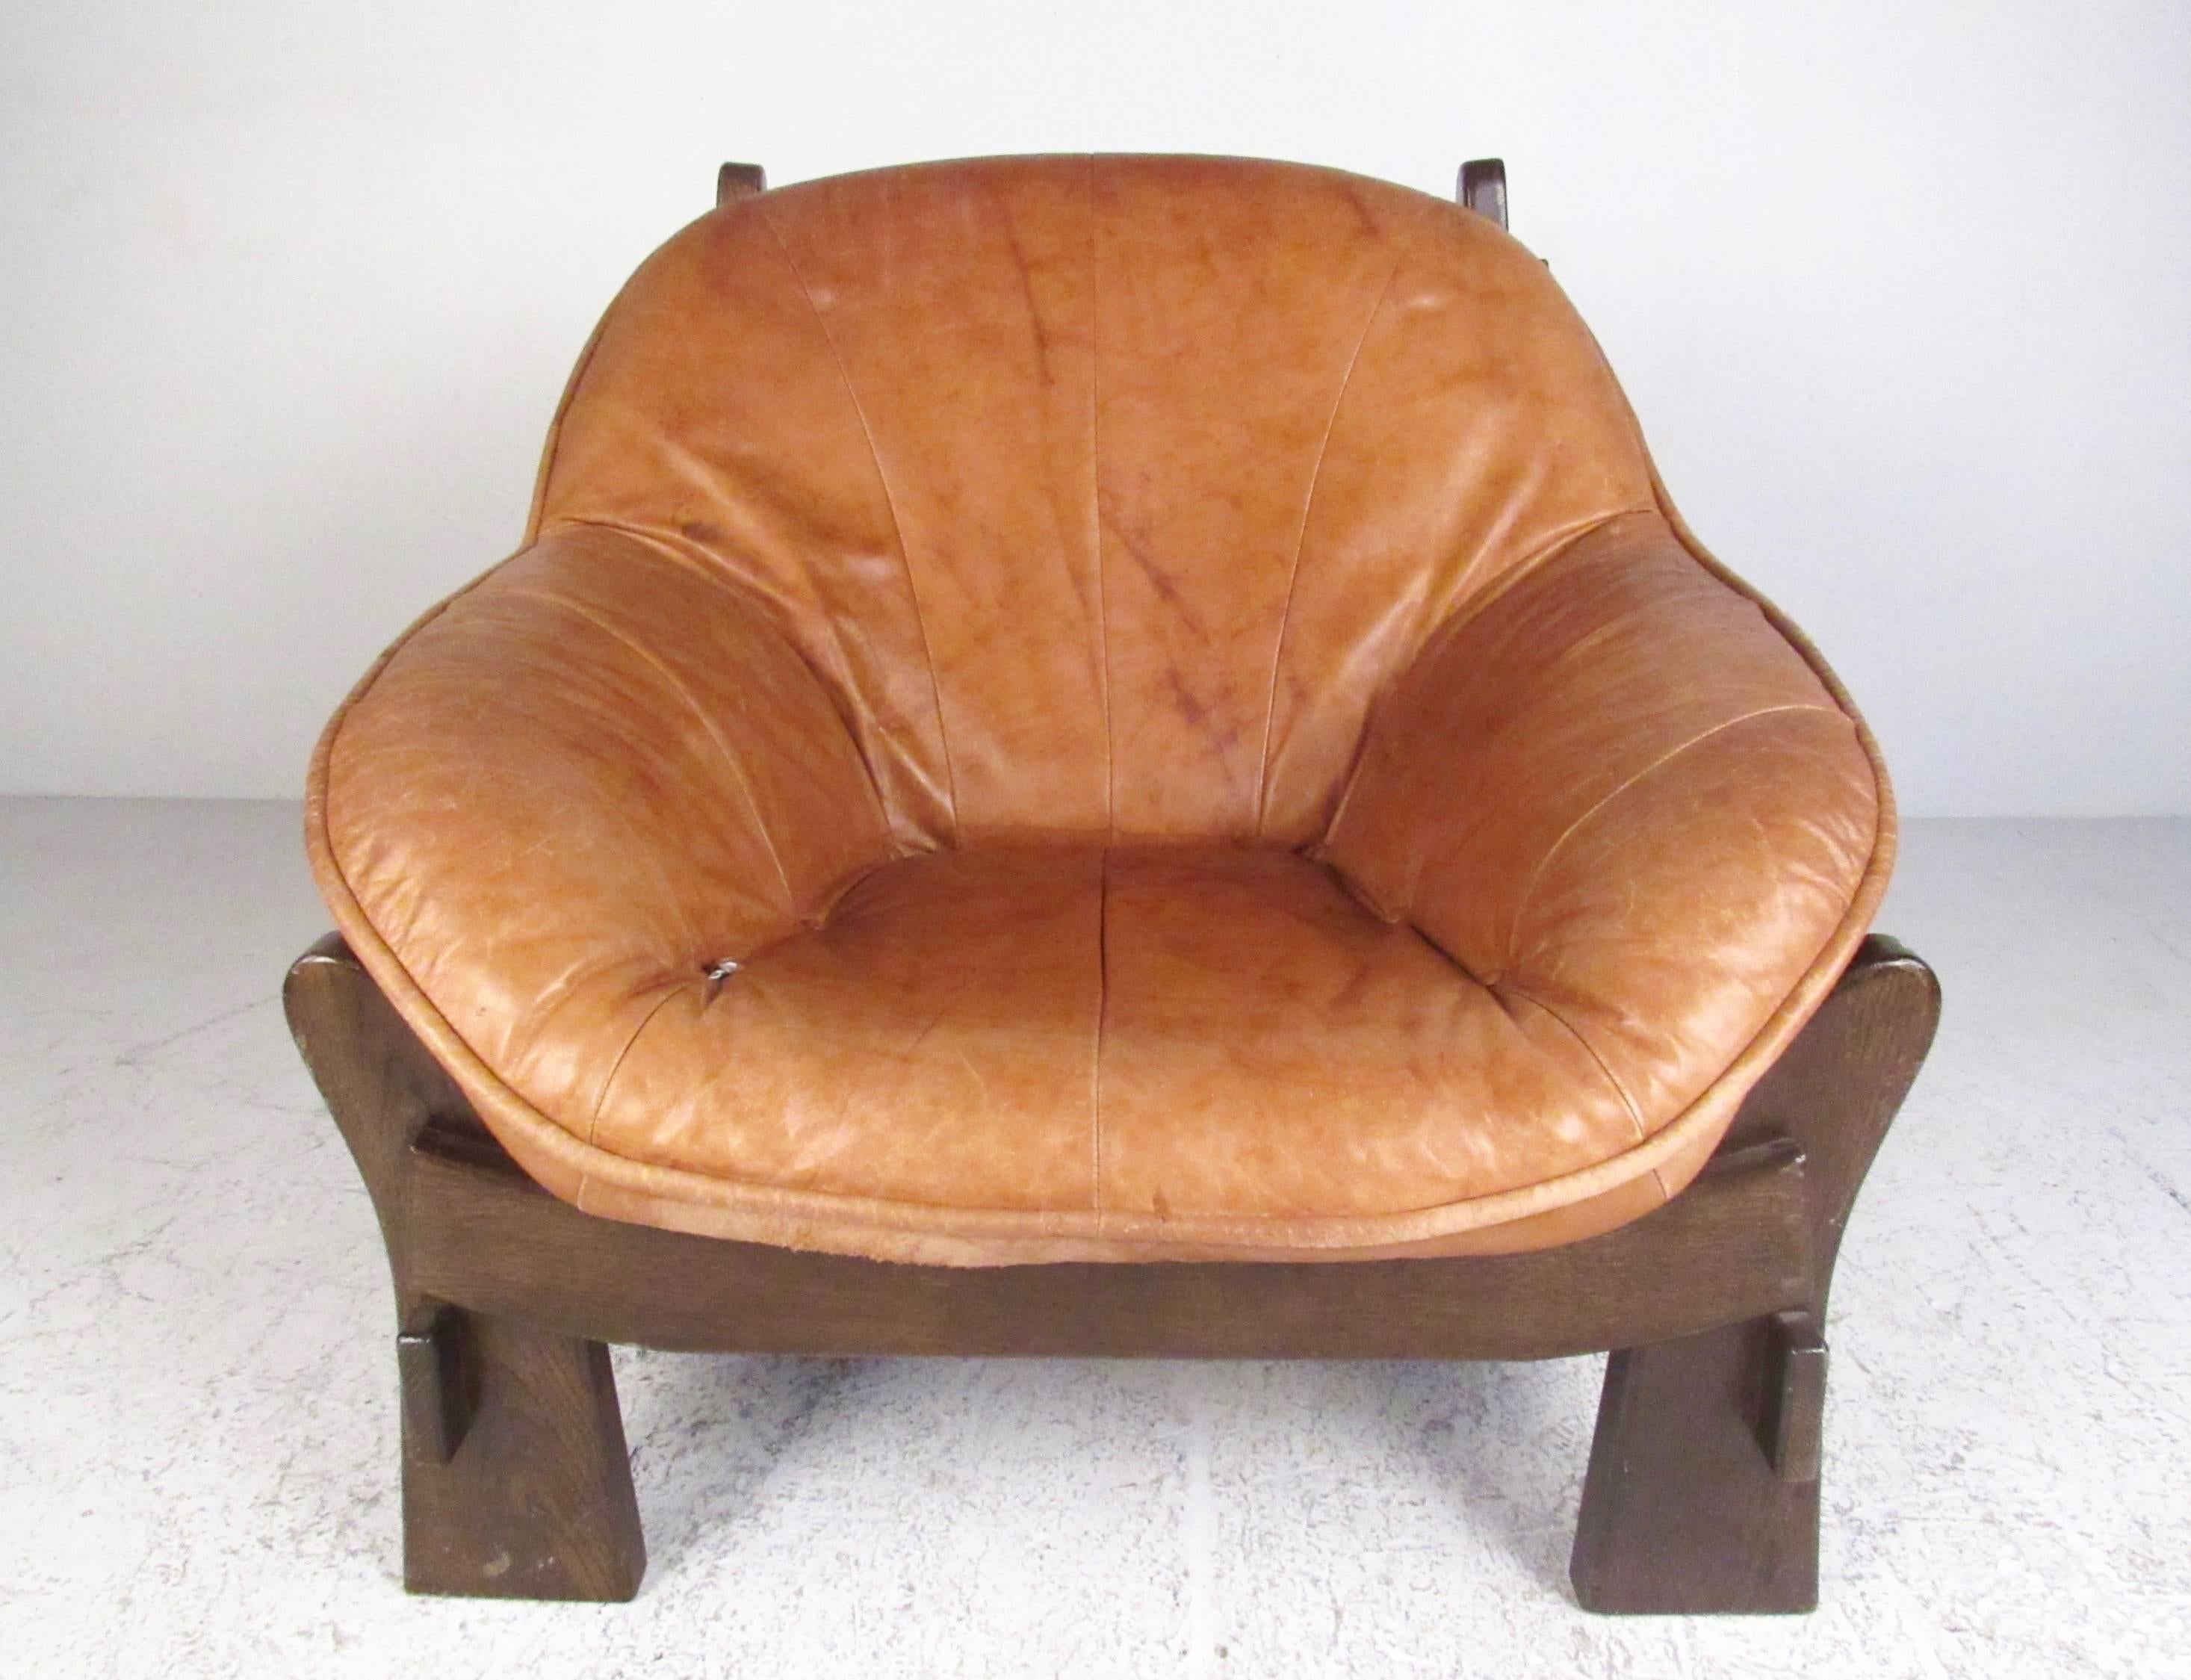 This vintage modern mix of comfort and mid-century style makes an impressive addition to any interior, and features plush leather upholstery and sturdy hardwood frame. Crafted in the Mid-Century style of Percival Lafer, this comfortable lounge chair